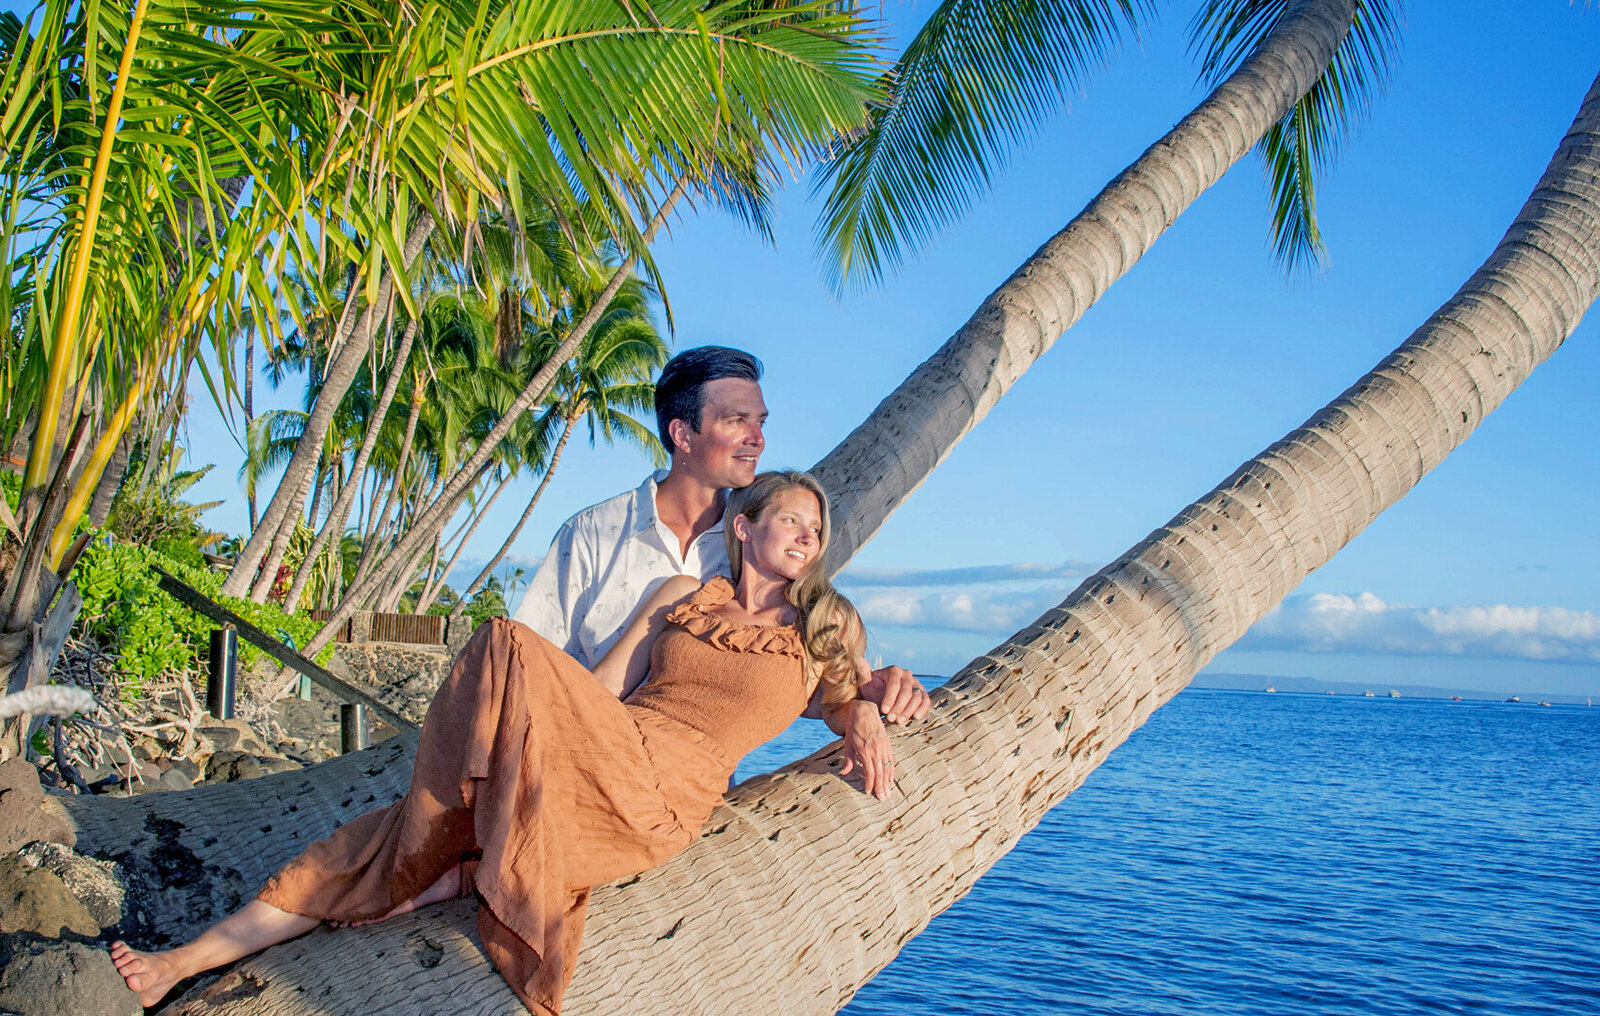 Photographers on Maui, for family portrait photography at affordable prices.